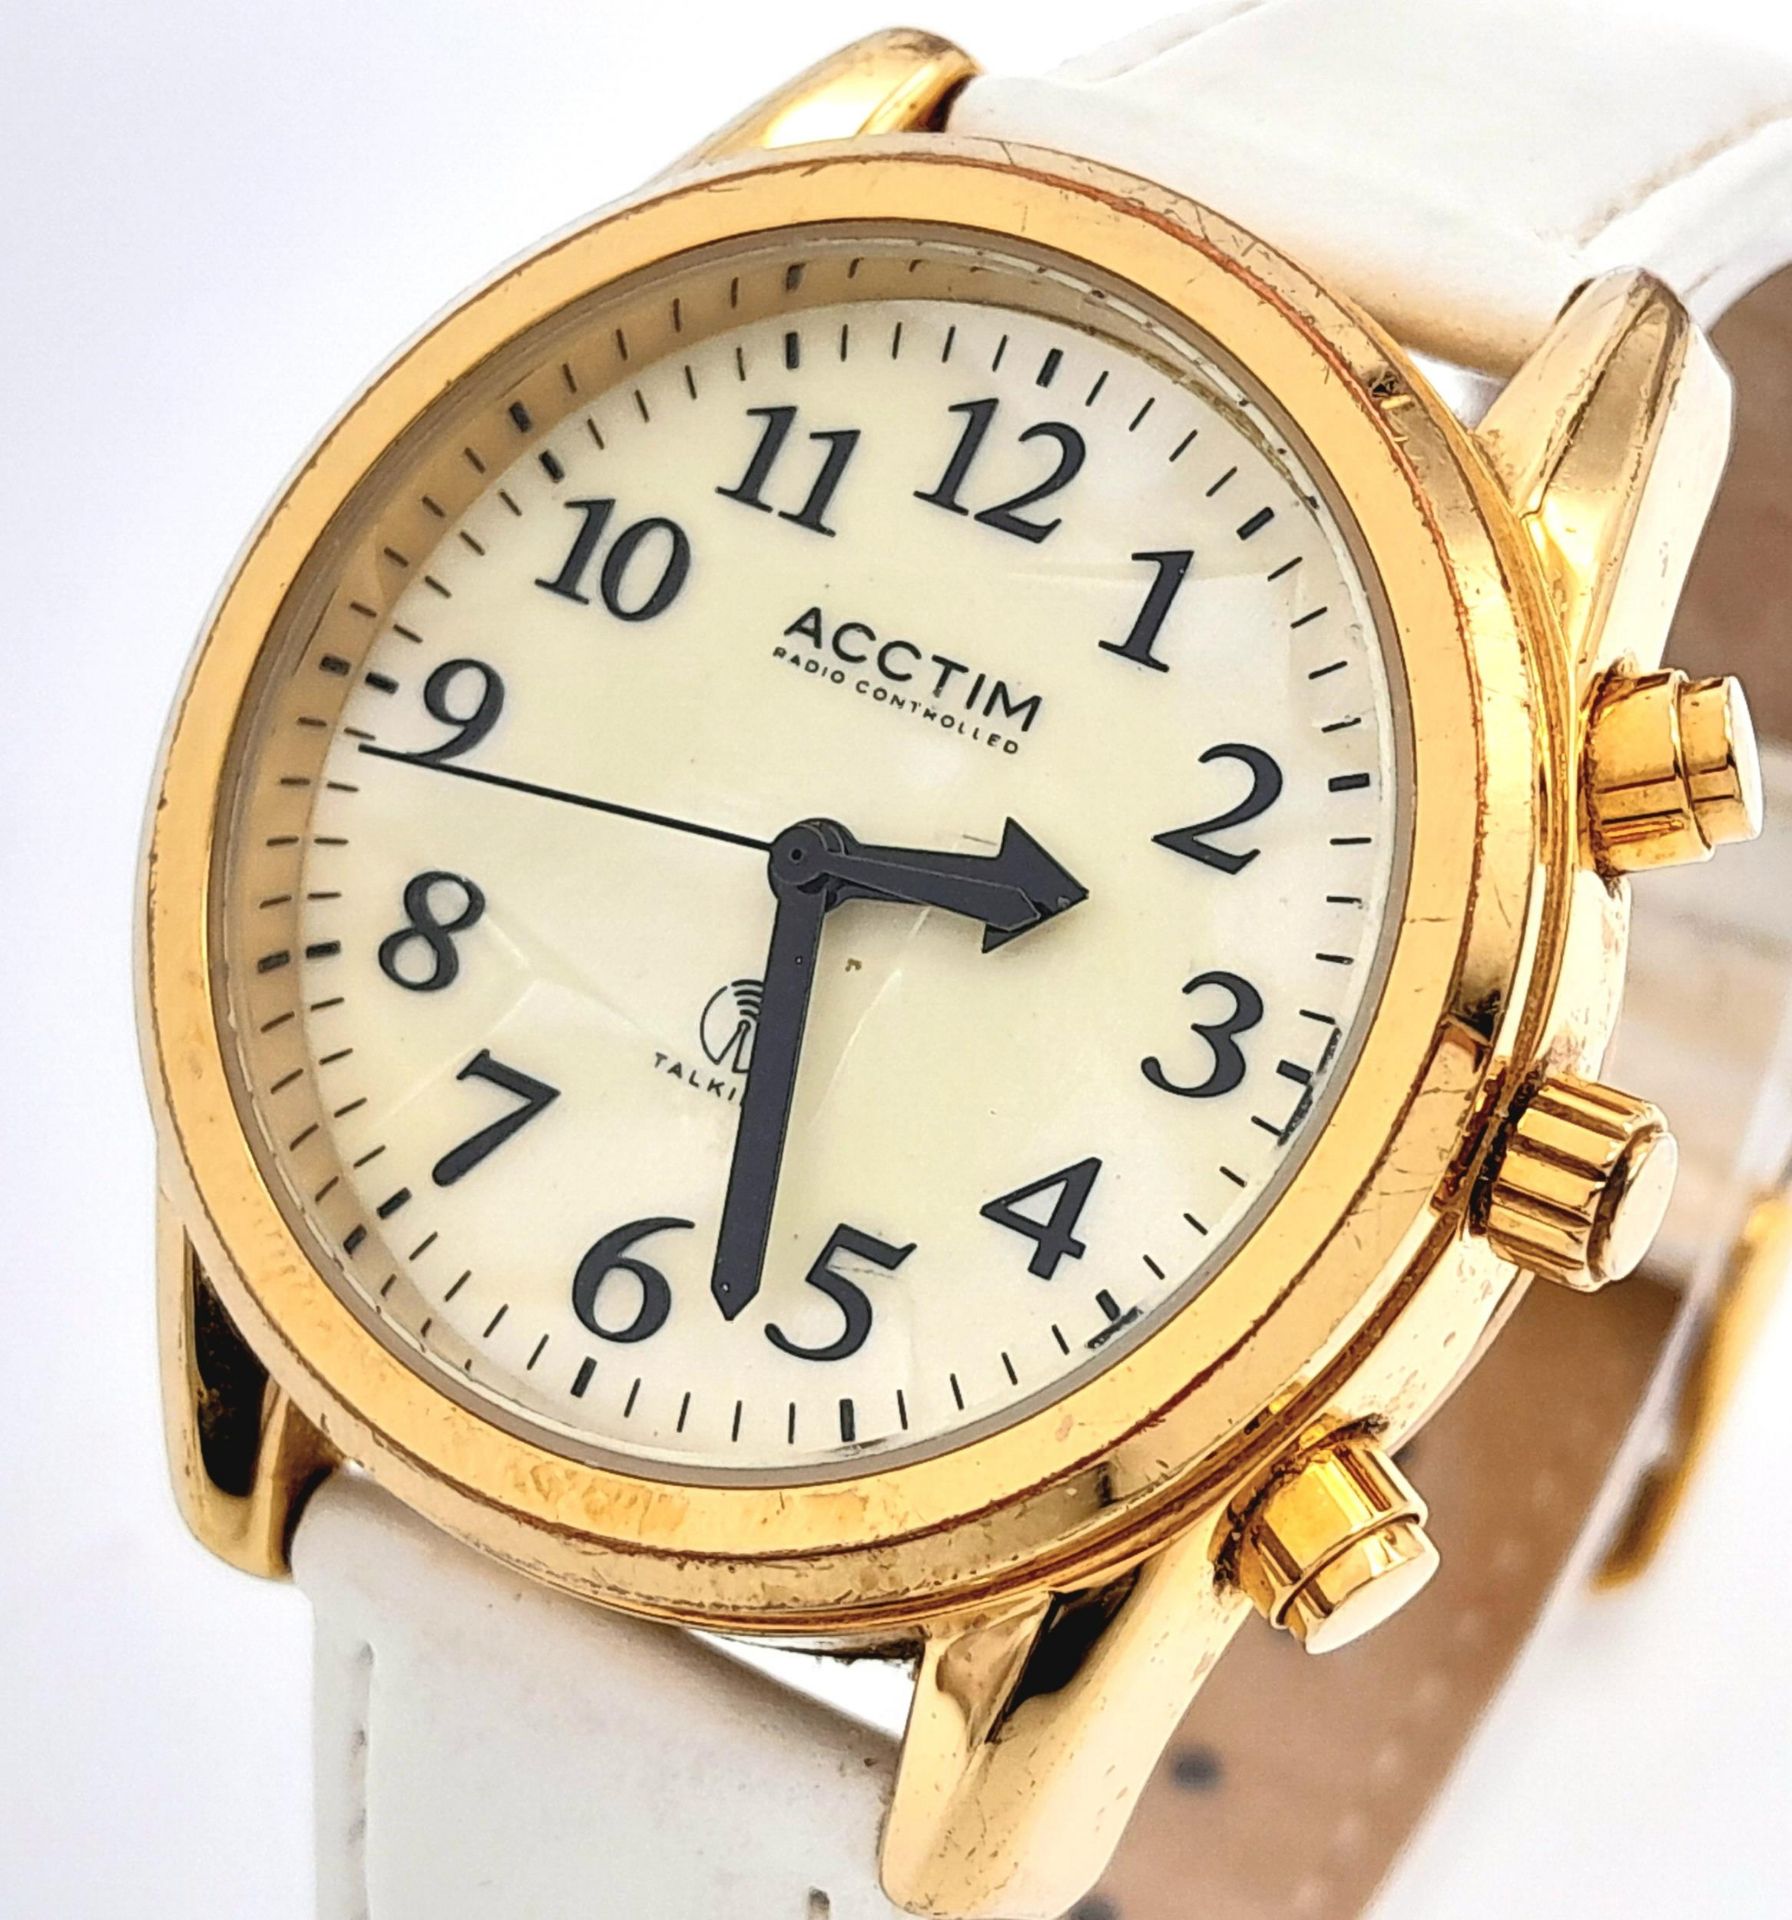 A Gold Tone, Radio Controlled Talking Watch by Acctim. Full Working Order, Very Good Condition. - Image 3 of 6